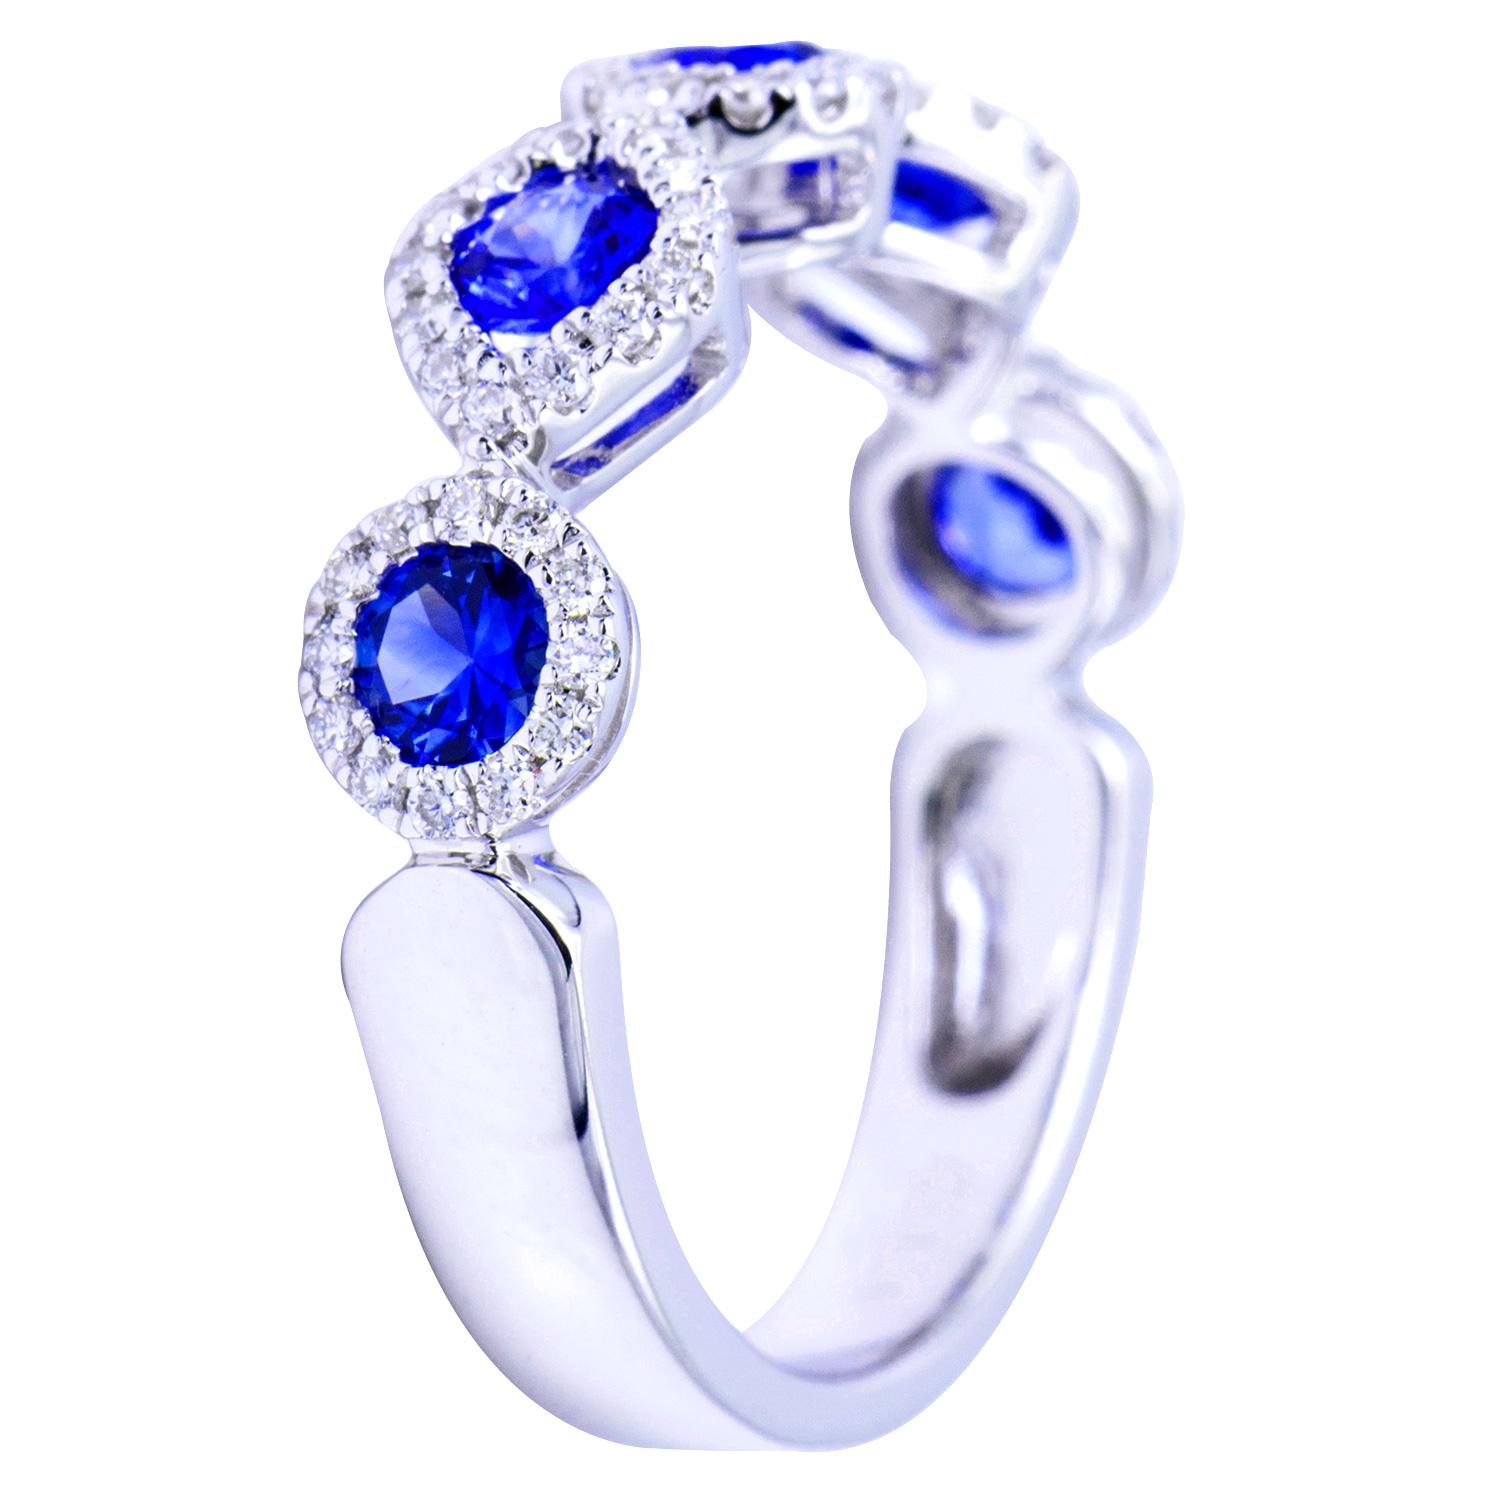 This gorgeous ring has 5 beautiful blue sapphires totaling 0.81 carats, Each sapphire is surrounded with VS2, G color diamonds. There is a total of 64 diamonds making up 0.25 carats. The stones are set in 3.5 grams of 18 karat white gold. This ring